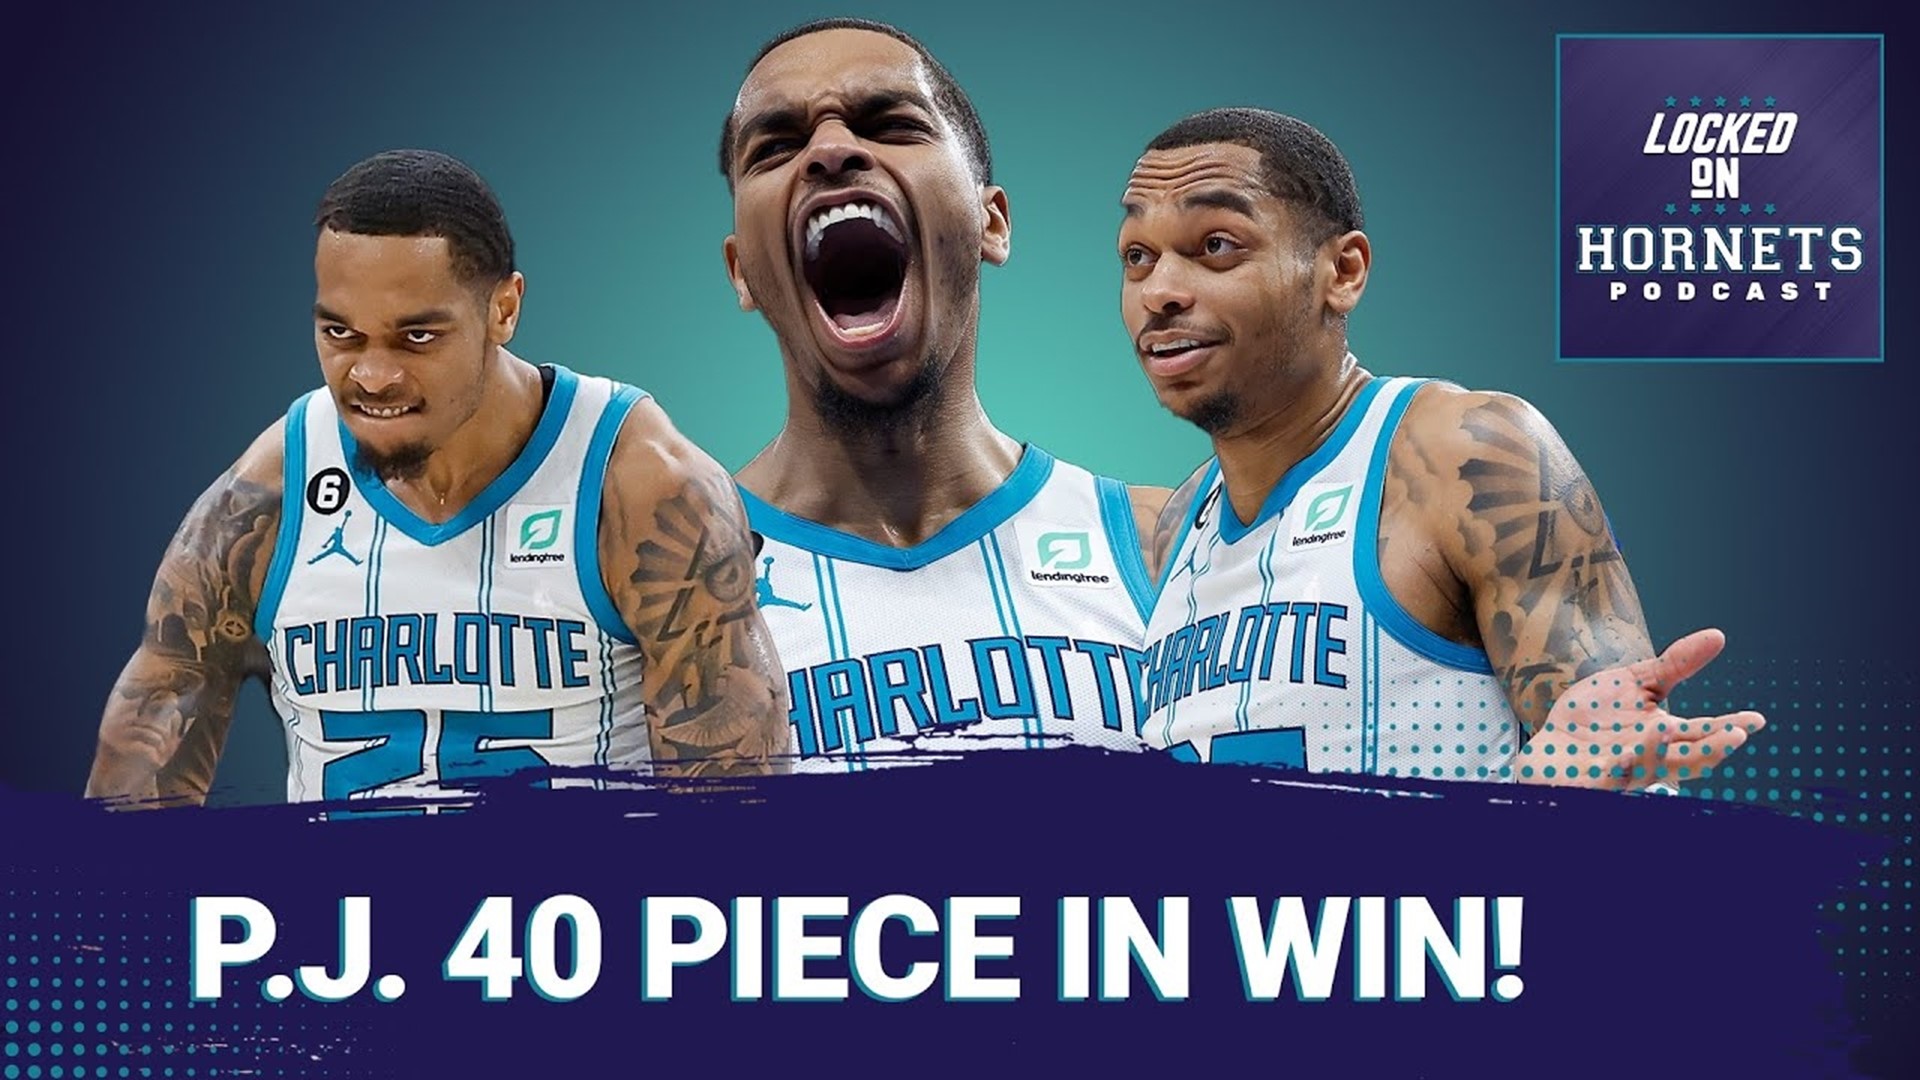 P.J. Washington goes for 43 points in a tightly contested 3rd straight win for the Charlotte Hornets.